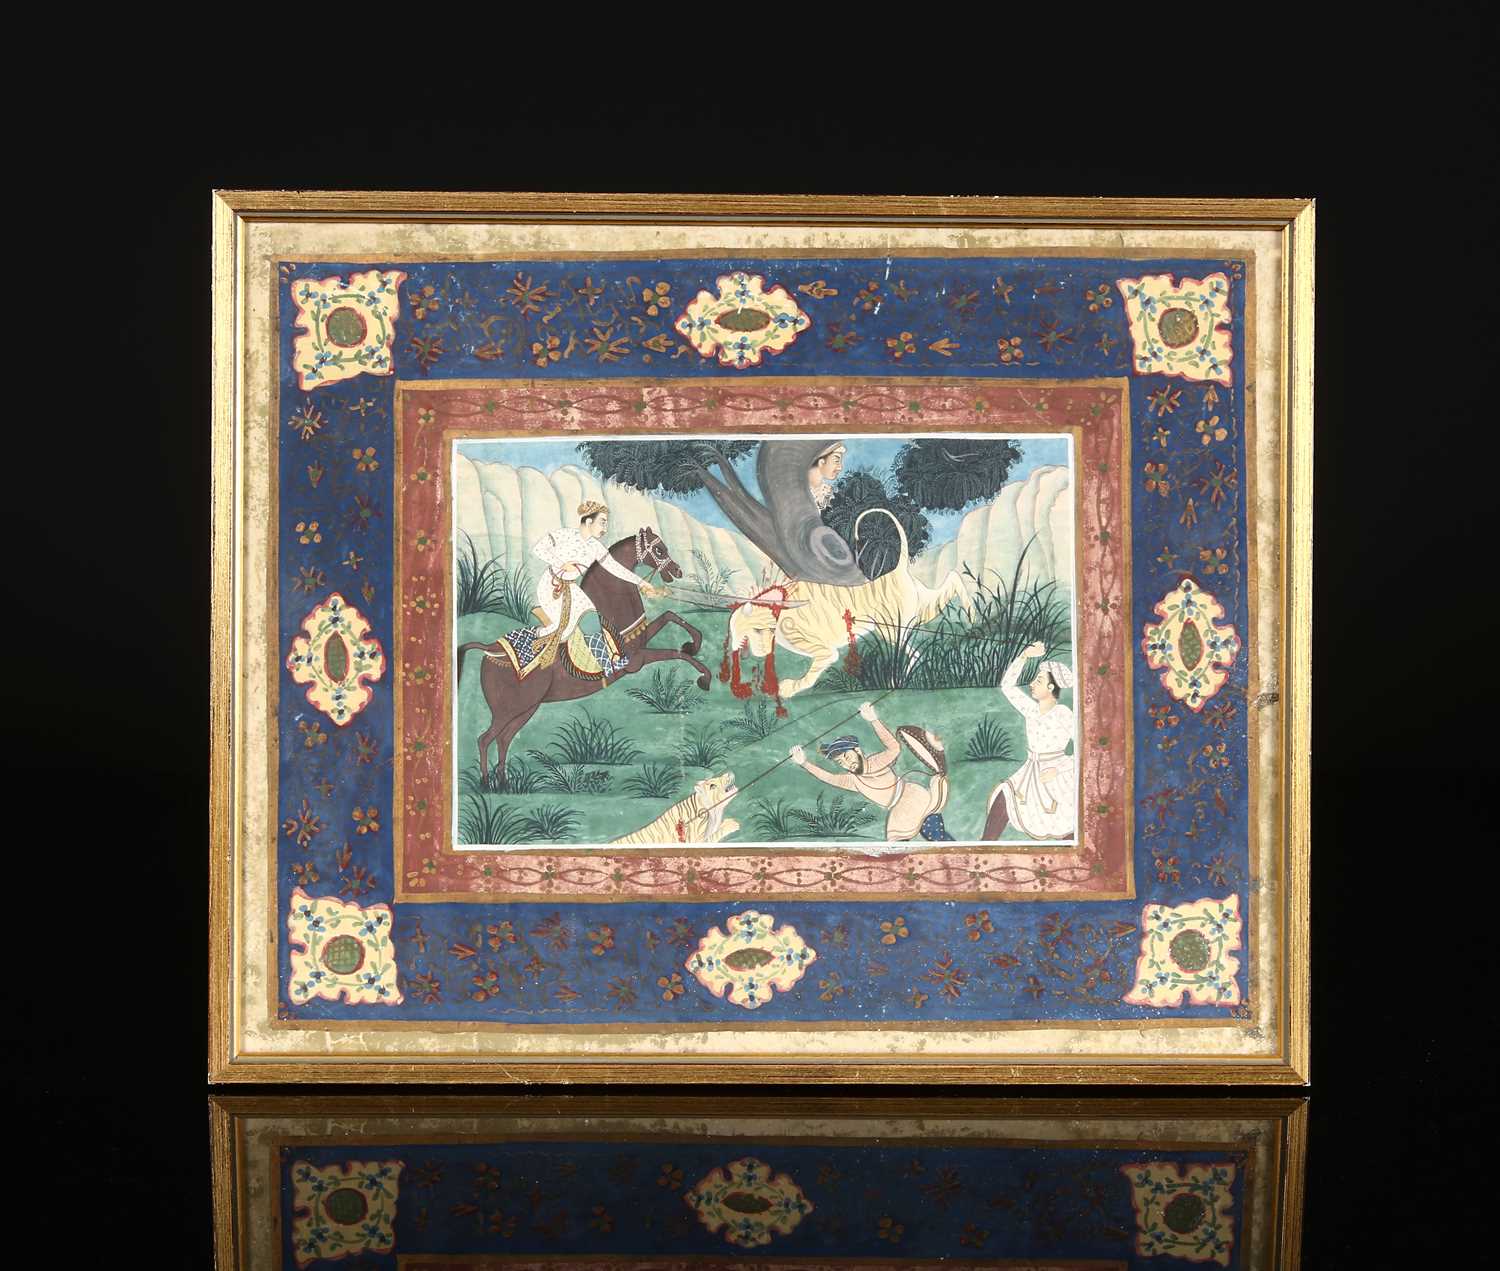 Lot 64 - Indian Miniature Painting of a Royal Tiger Hunt